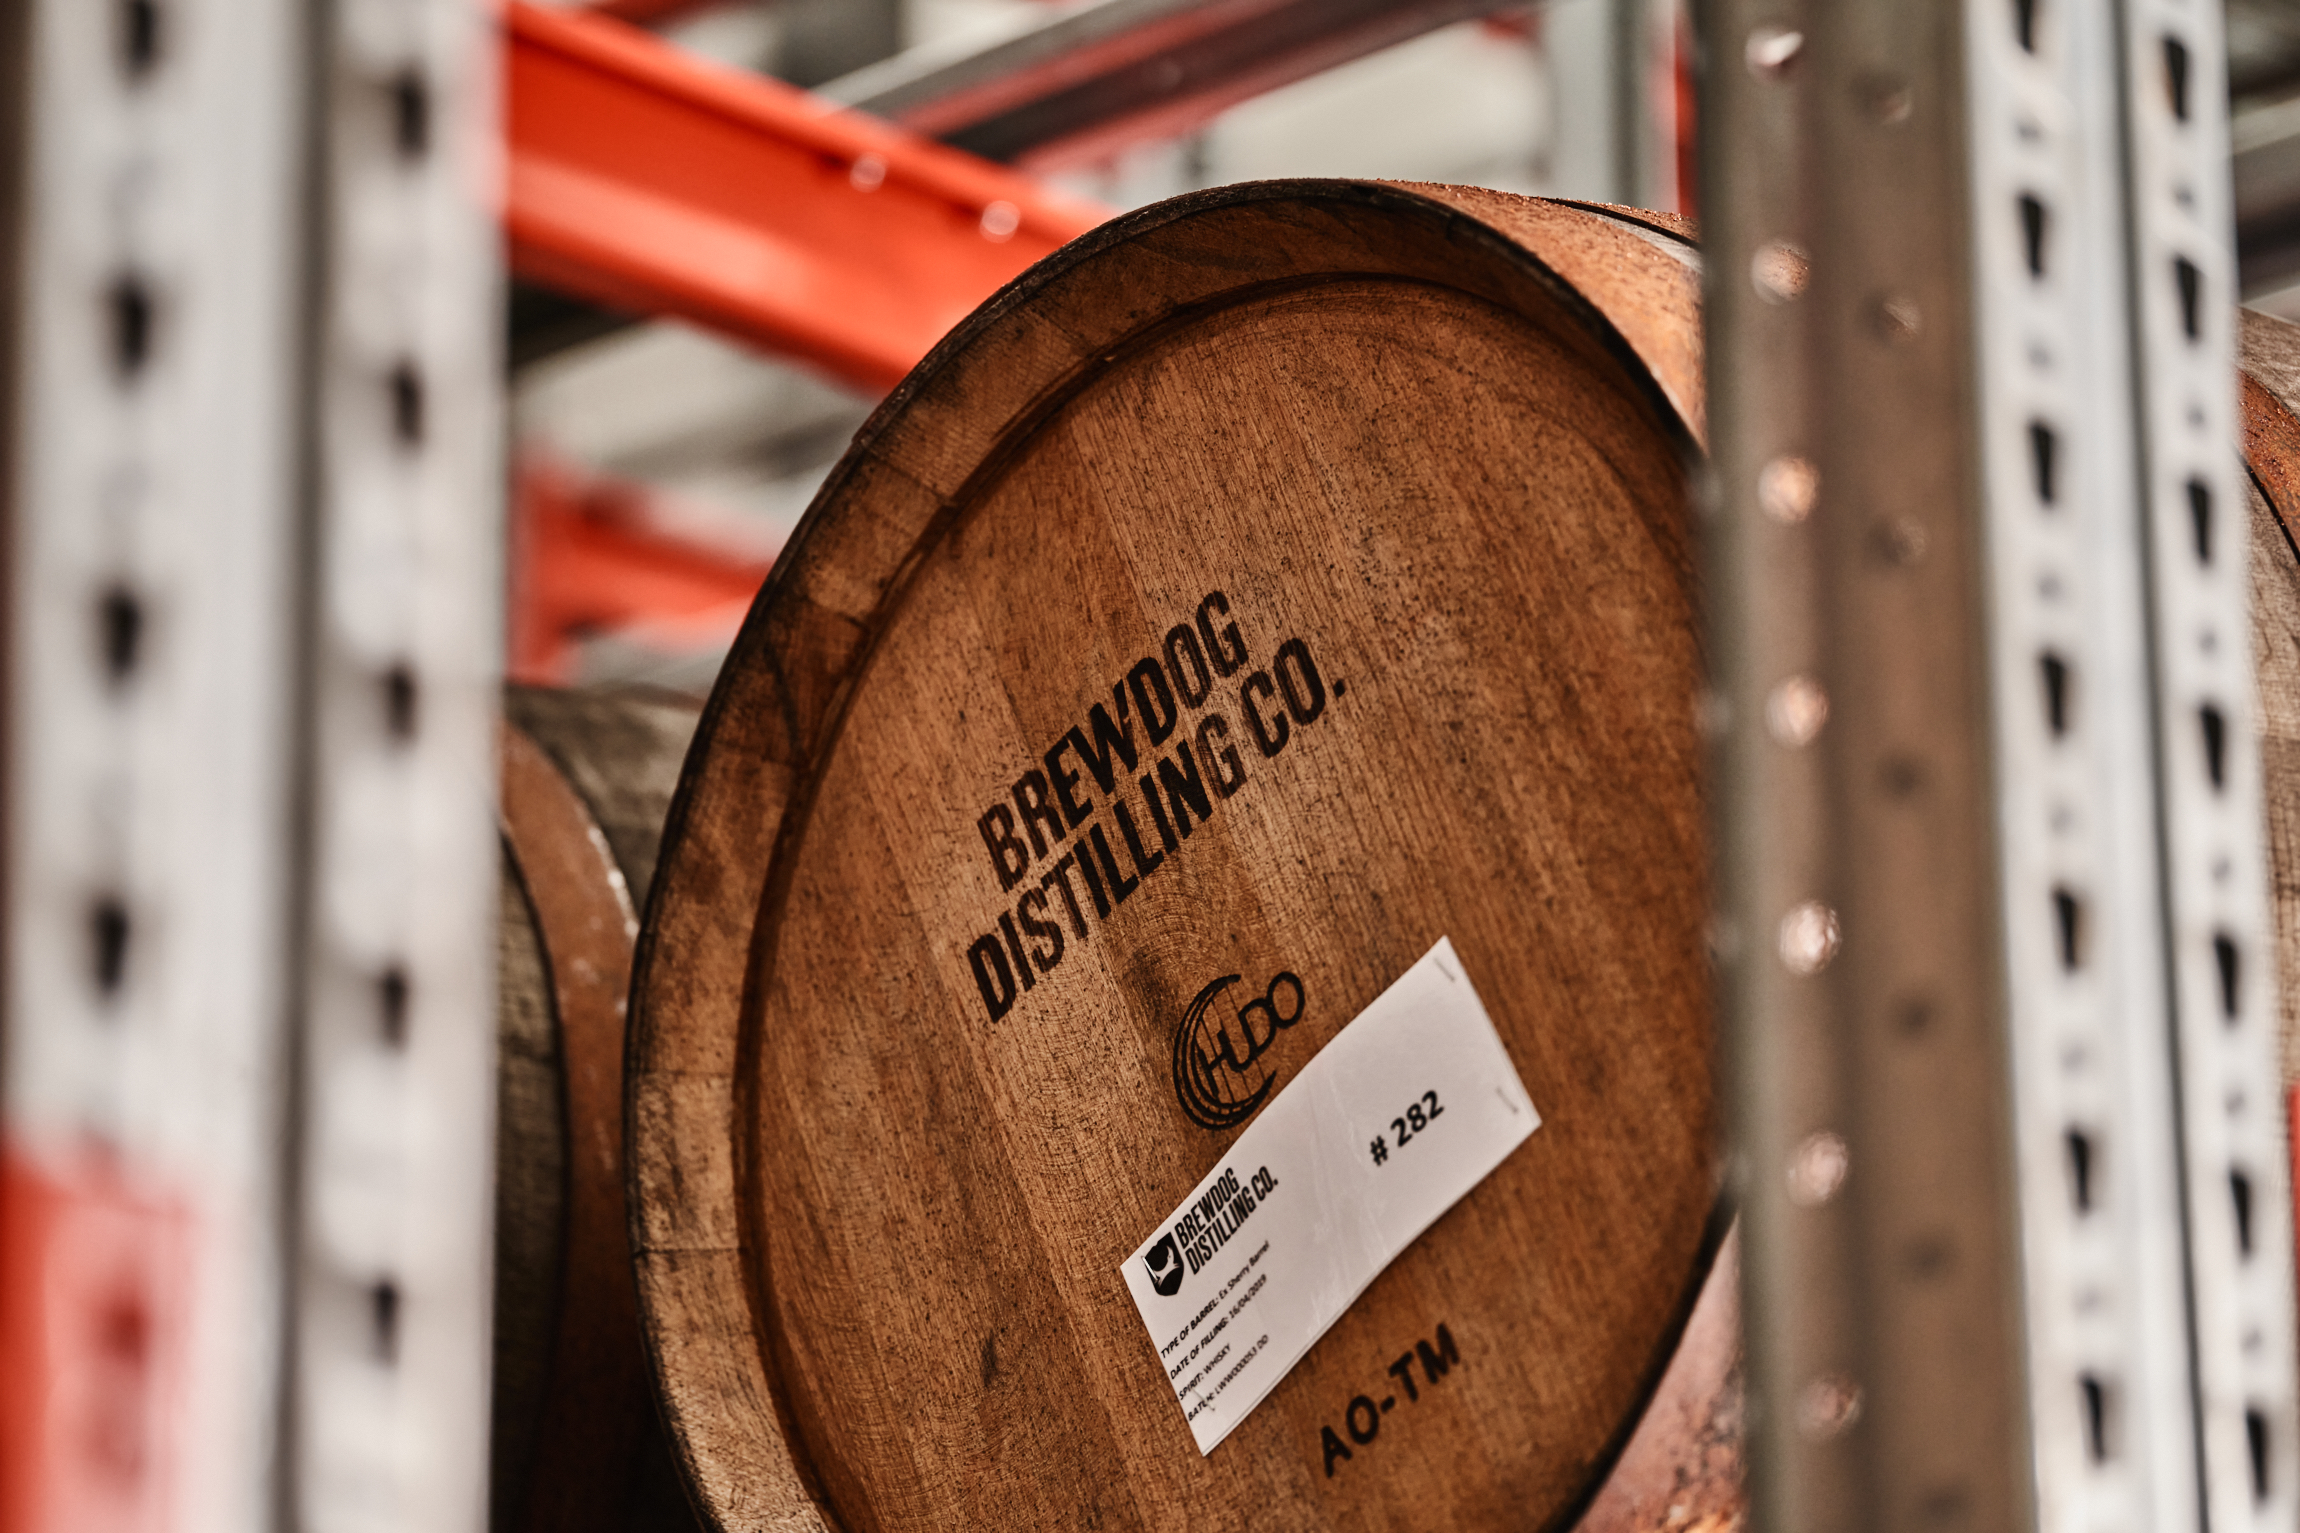 BrewDog Distilling Co. launches its first rum casks for sale as part of Whisky Hammer auction